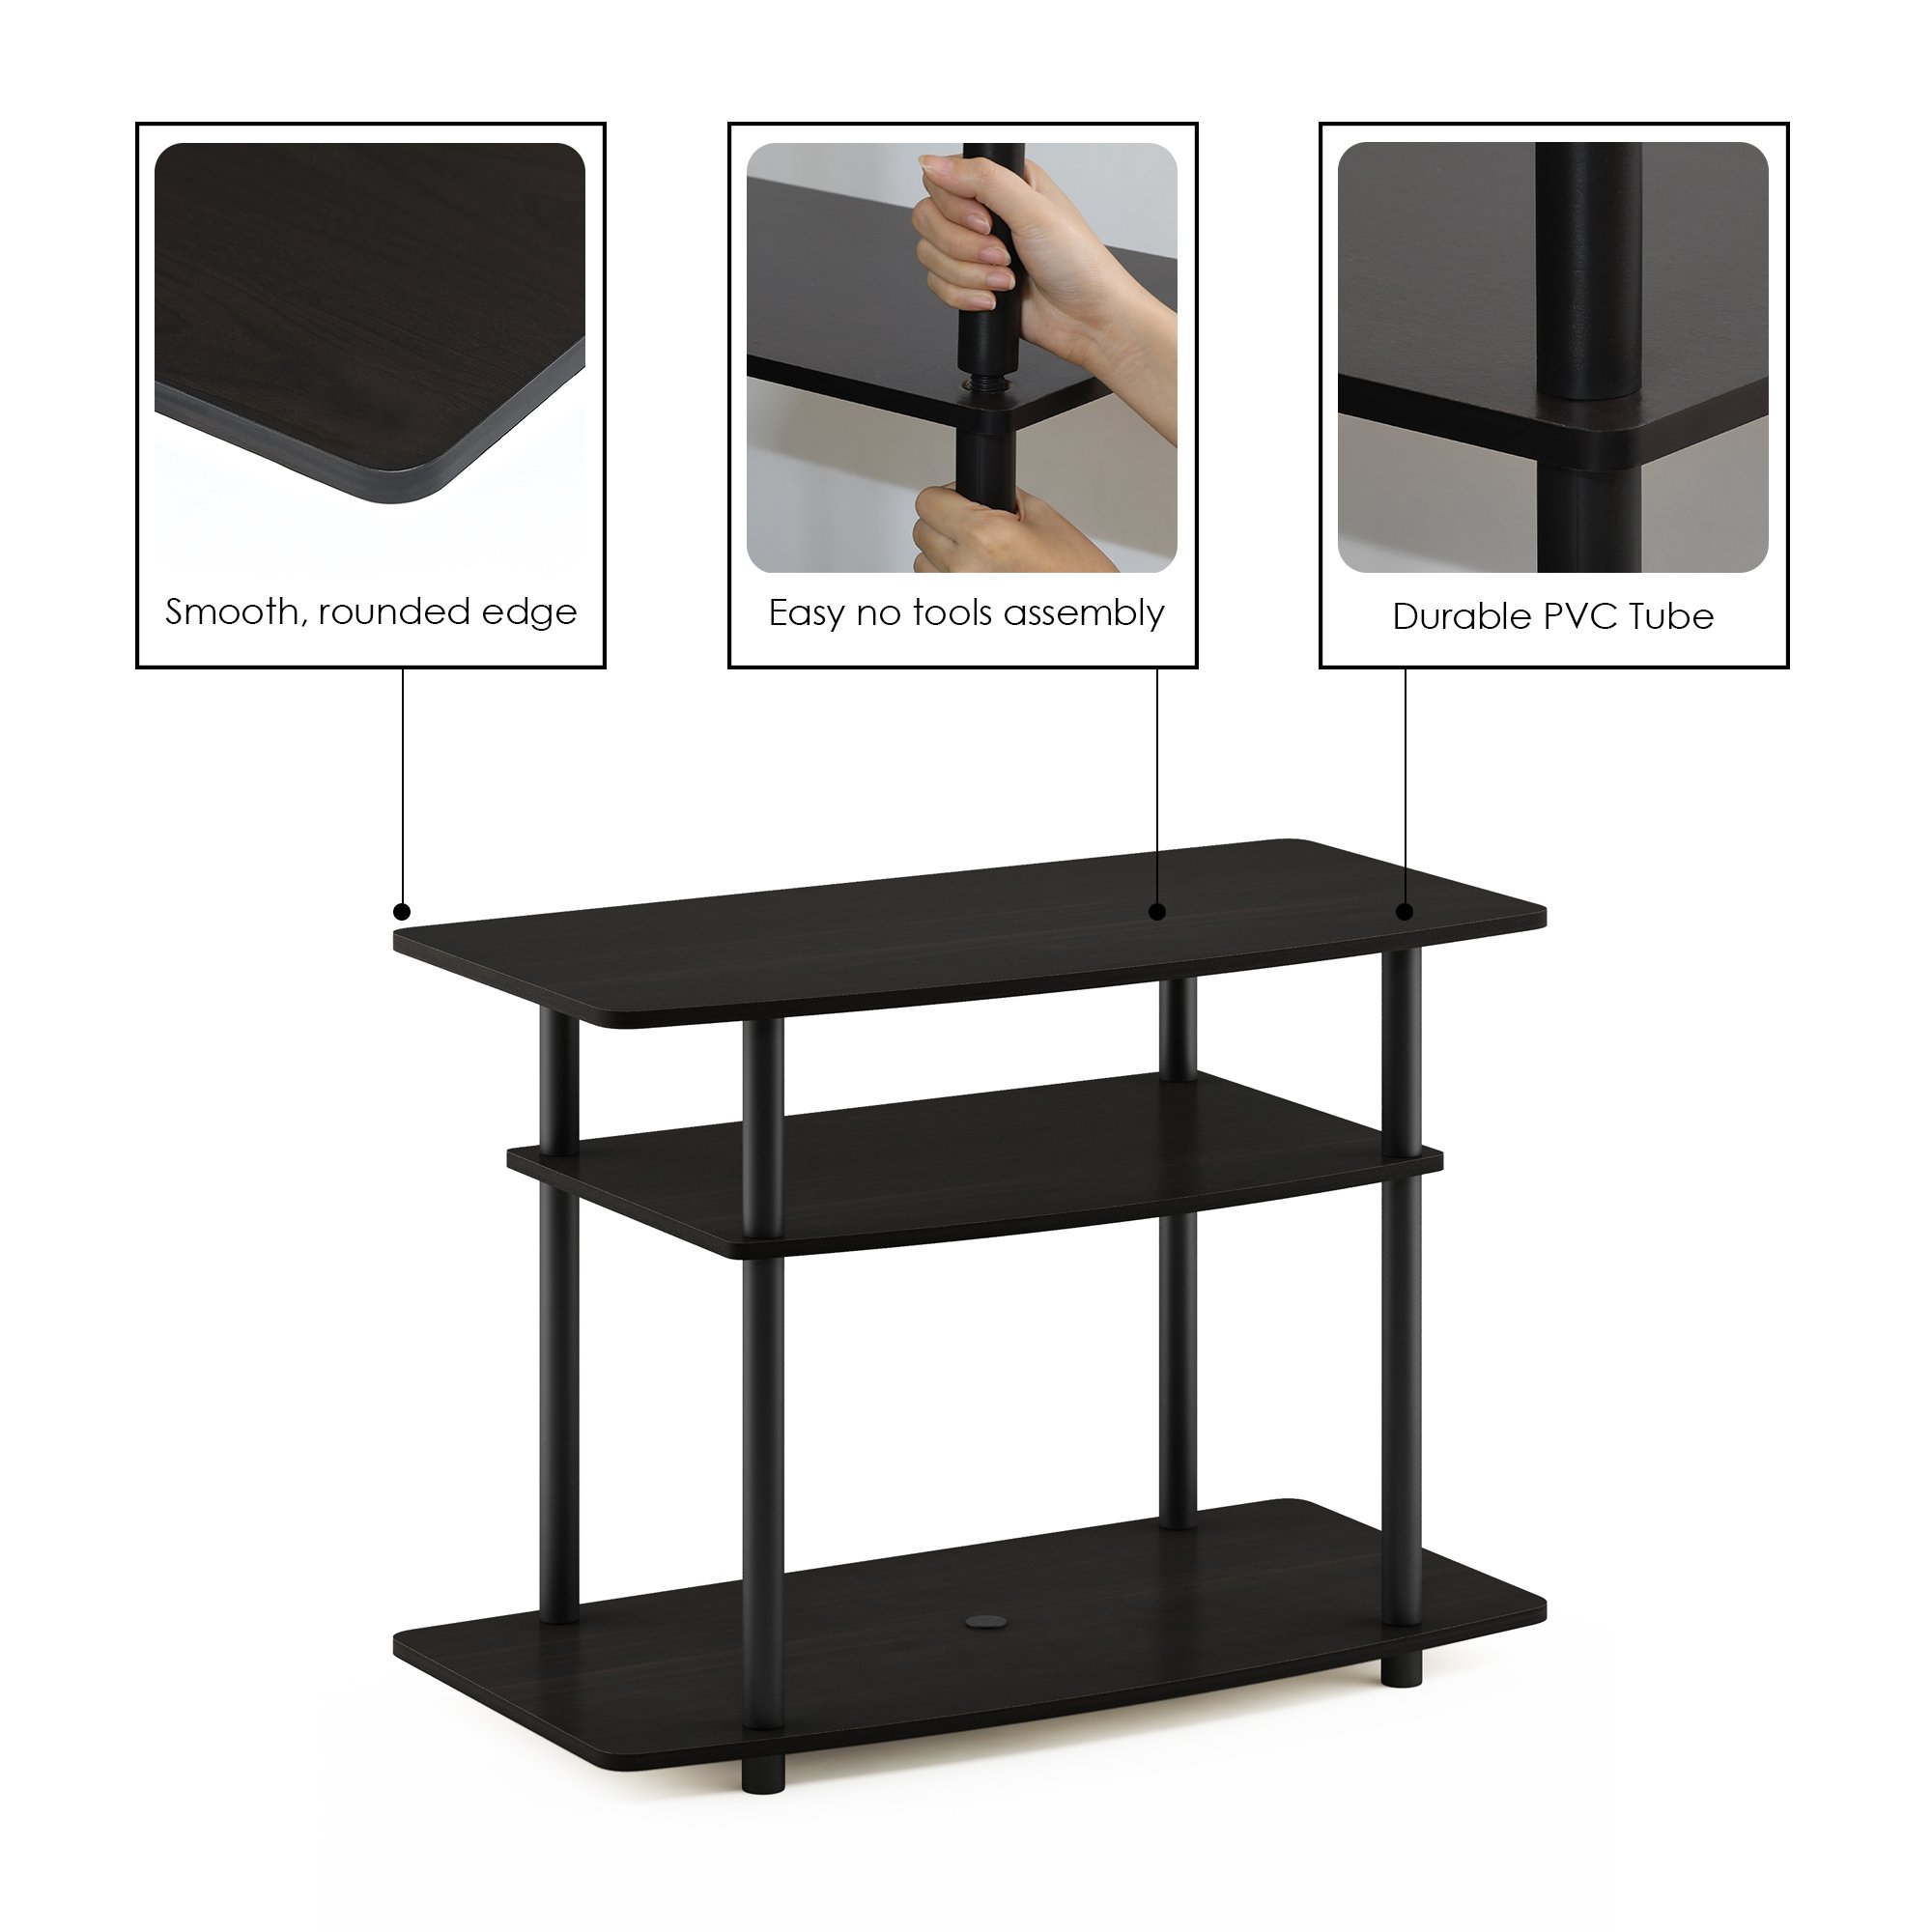 Furinno Turn-N-Tube No Tools 3-Tier TV Stands for TV up to 32 Inch